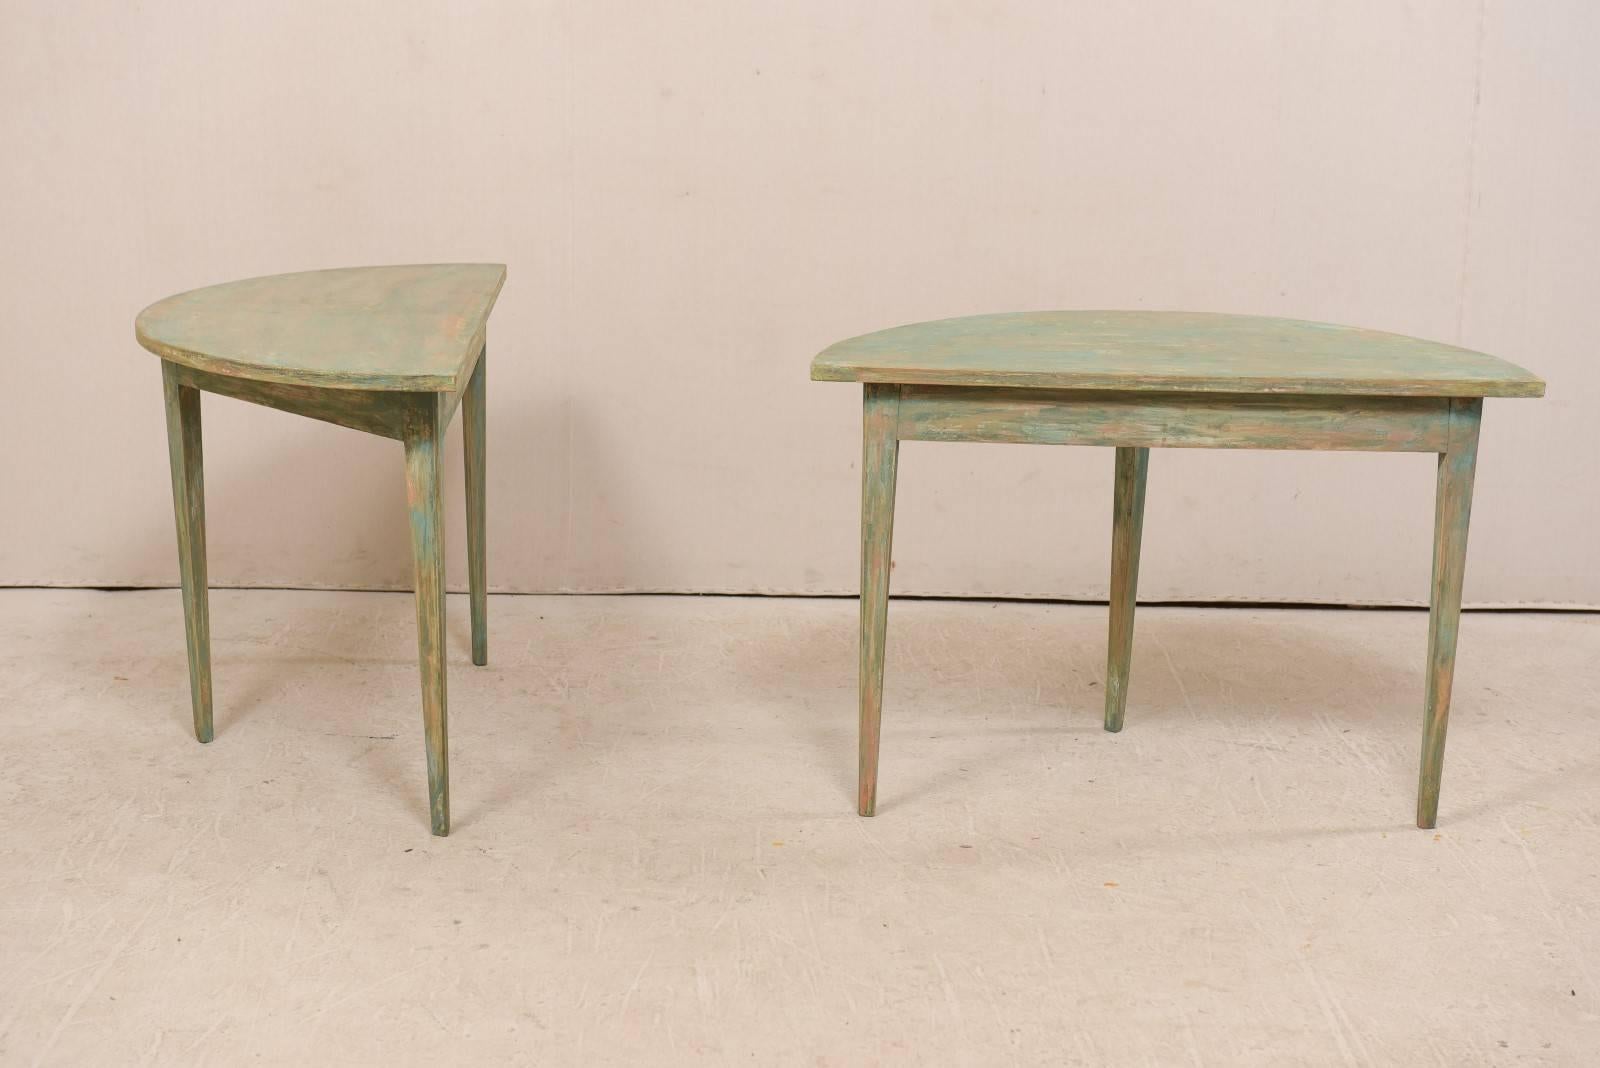 Pair of Swedish 19th Century Painted Wood Demilune Tables with Tapered Legs 2